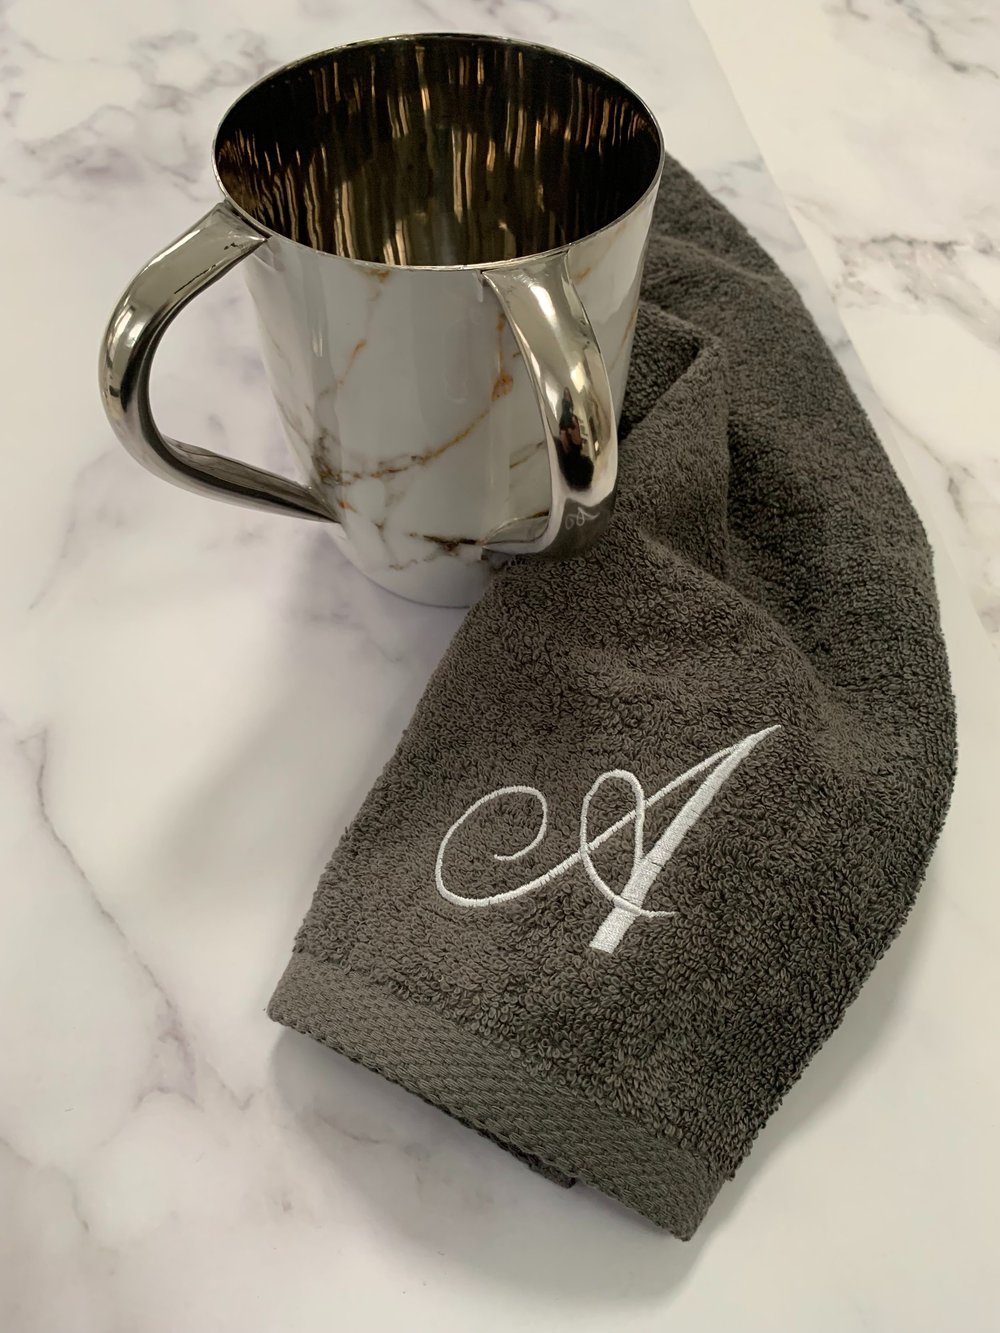 Choice of Washing Cup with Monogrammed Towel — The Doily Lady